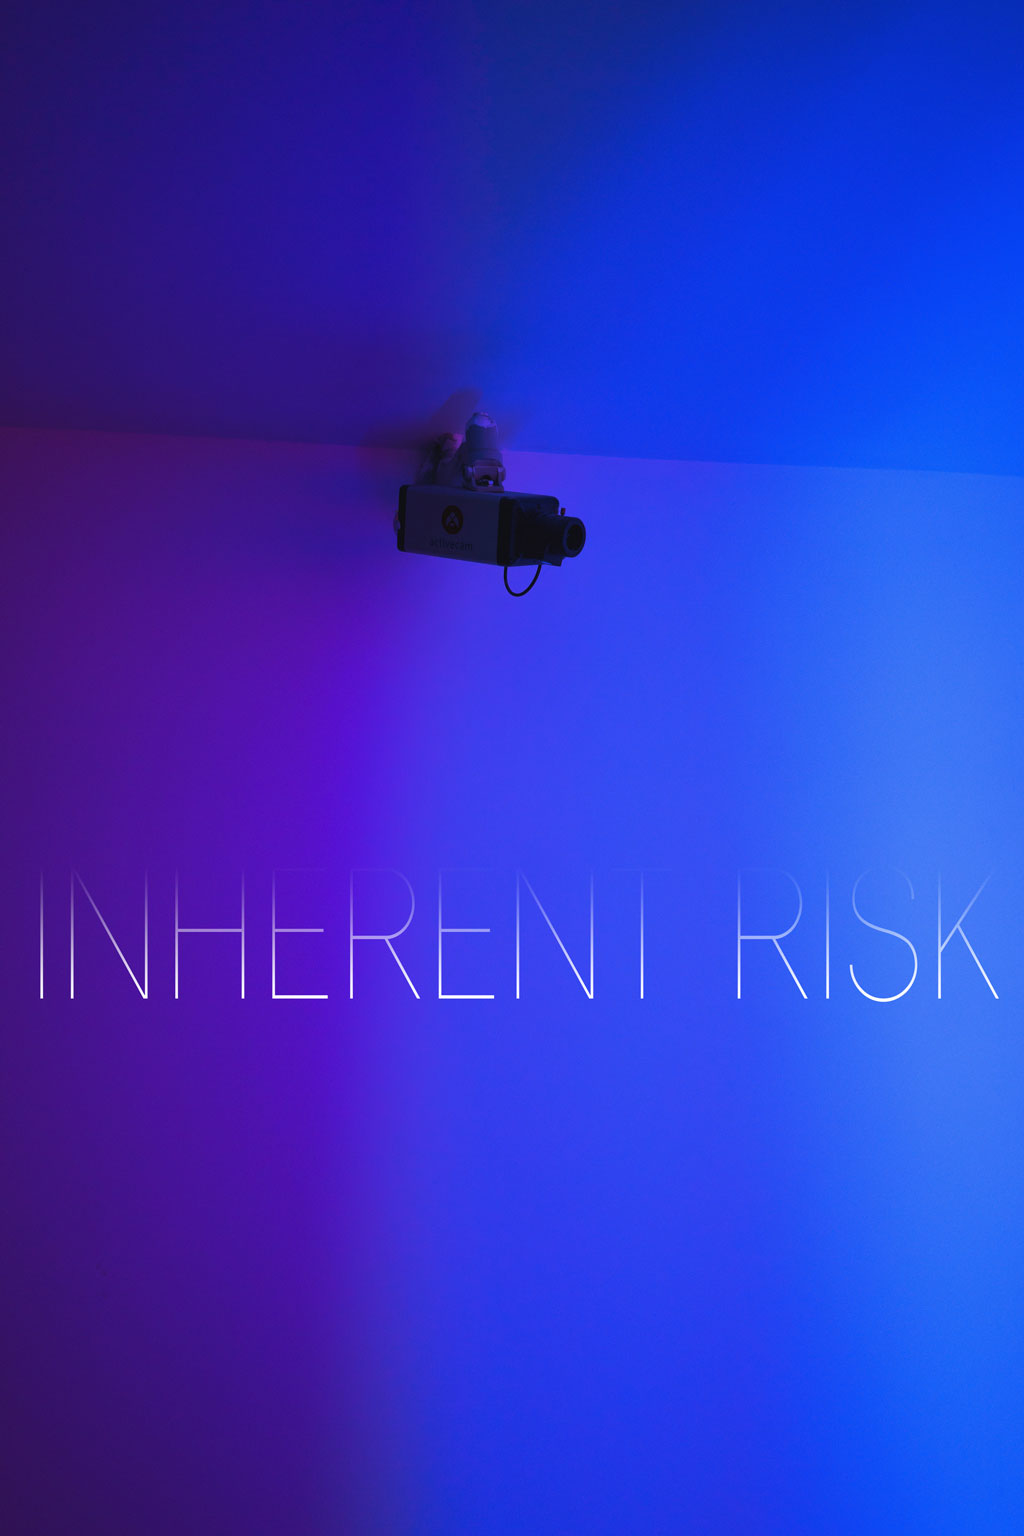 Security camera fastened to the ceiling surrounded by blue and purple lighting, with the title of the piece in the center of the image